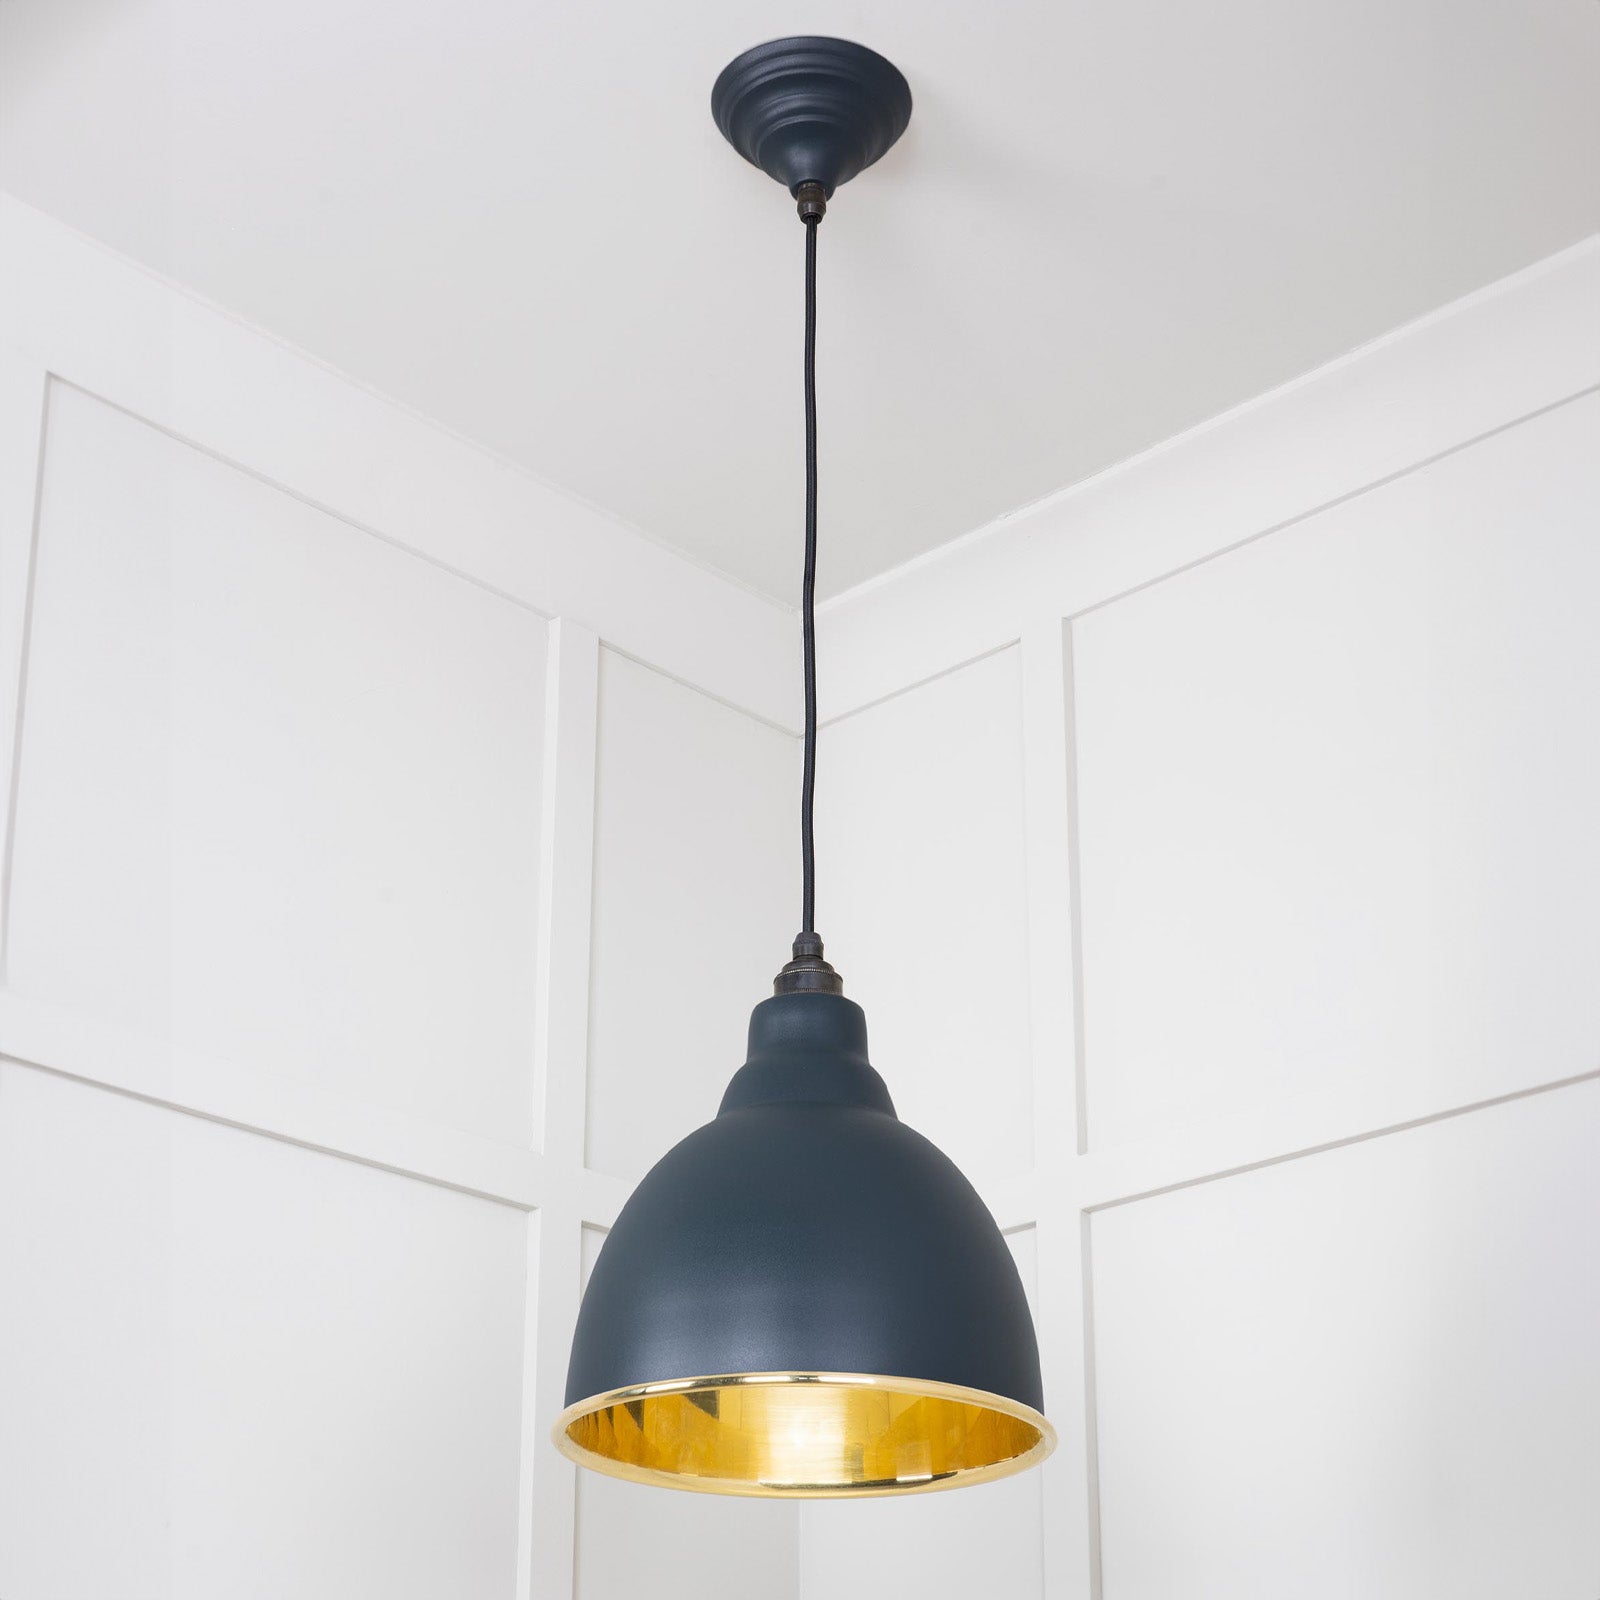 SHOW Full Image of Hanging Brindley Ceiling Light in Soot